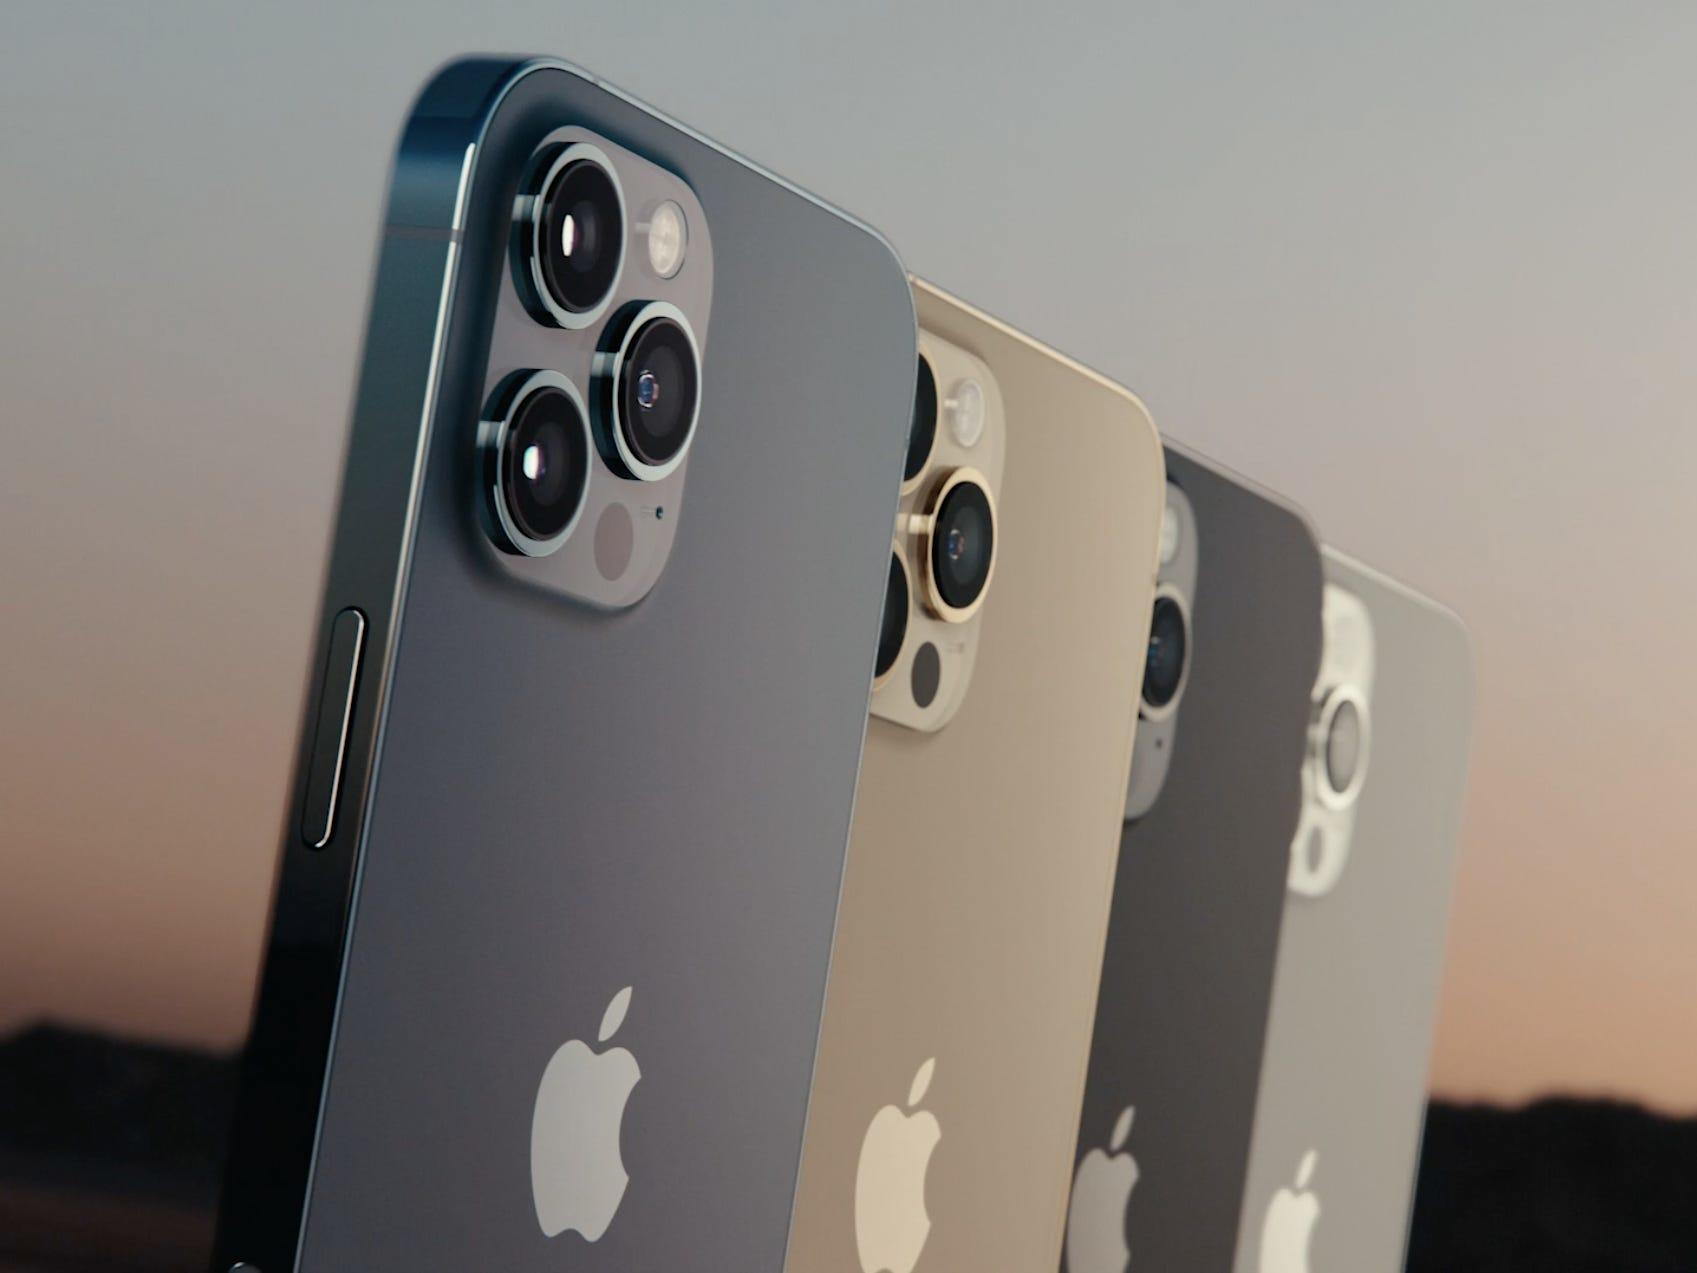 The Iphone 12 Pro Is Available In 4 Colors — Heres How To Decide